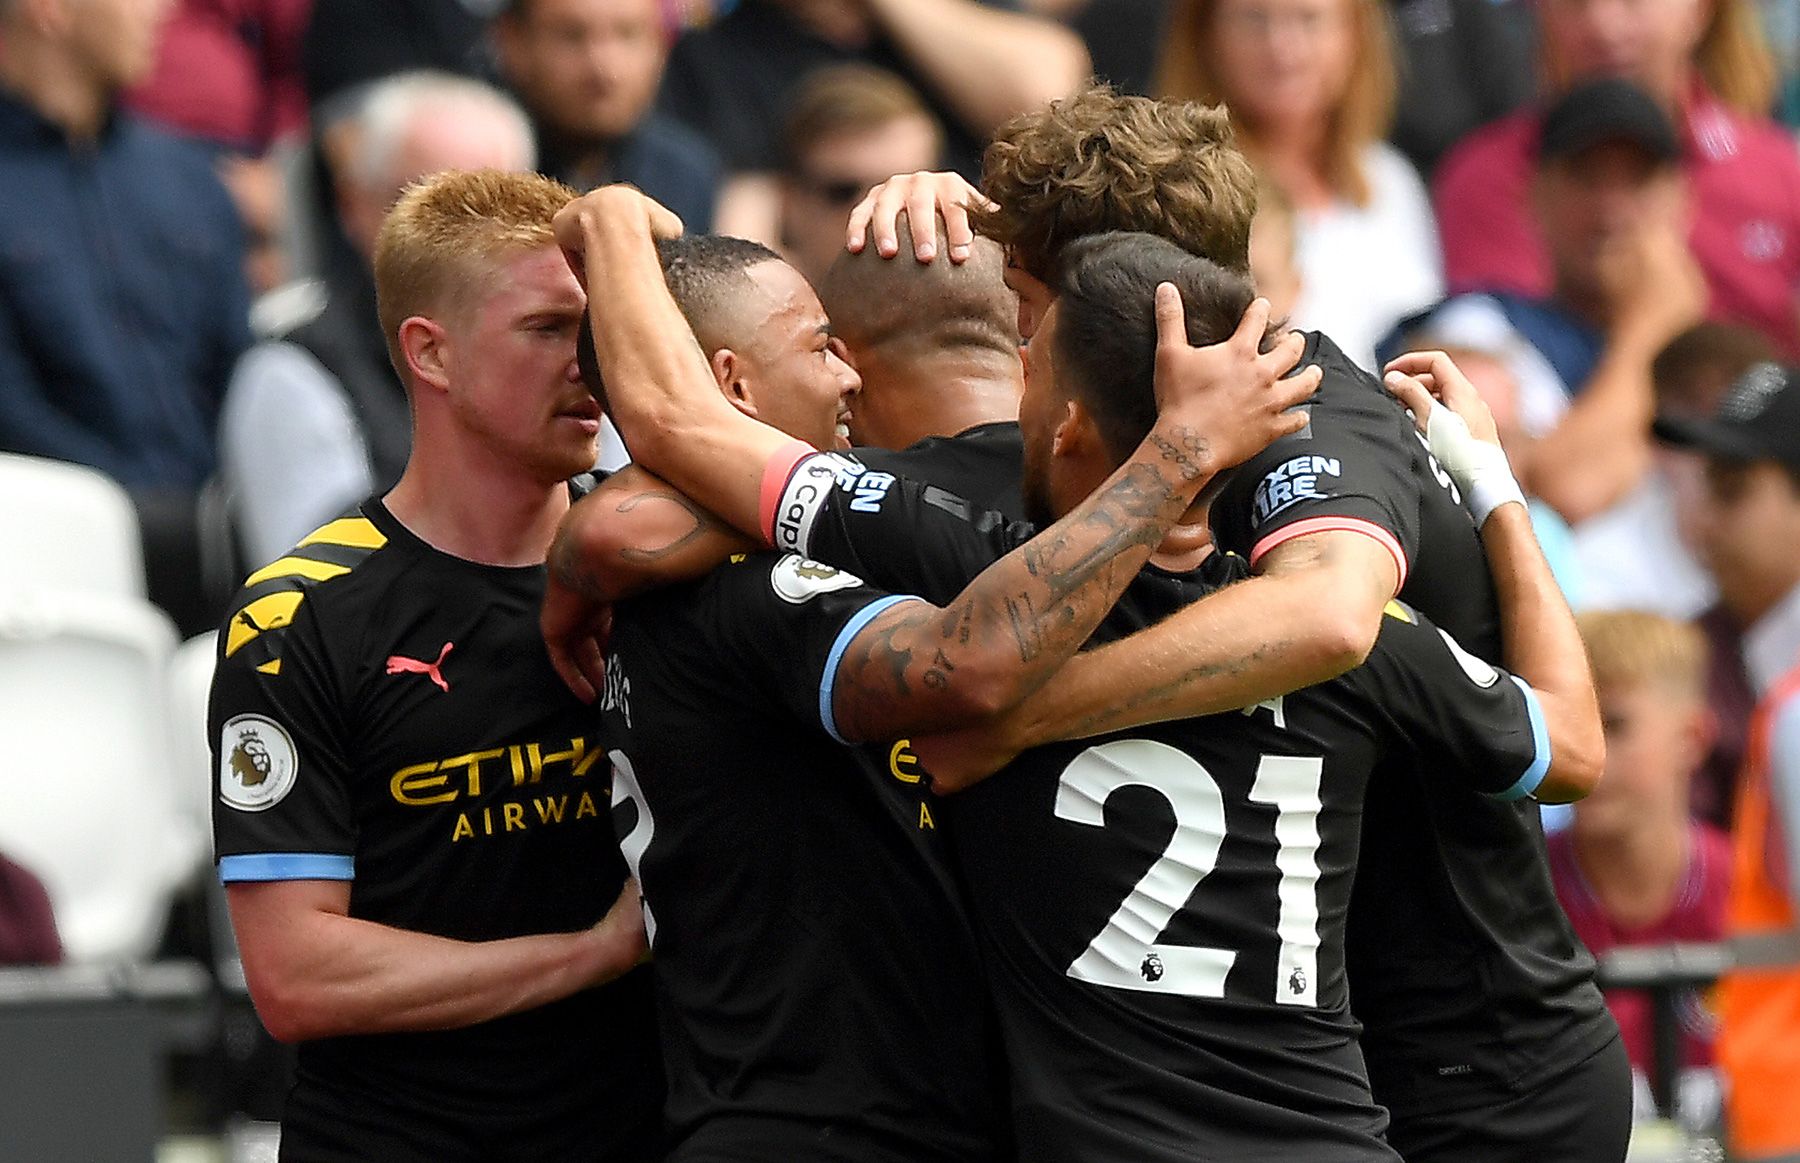 Manchester City players celebrate a goal against West Ham